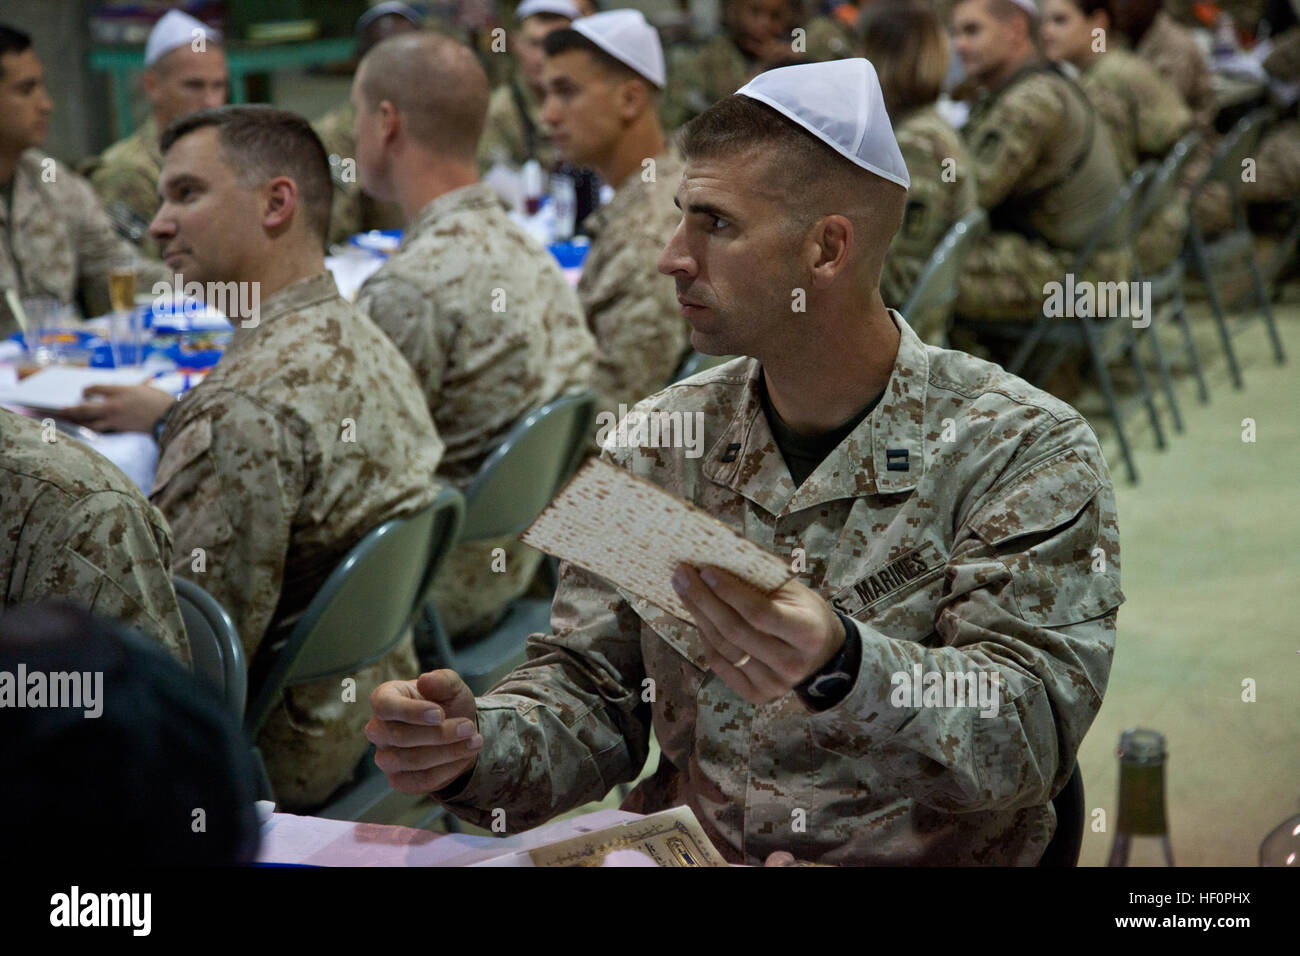 U.S. Marine Capt. Daniel Hinkson, Combat Logistics Battalion 1, holds a piece of Matzah bread during a Passover Seder here, April 7, 2012. Passover commemorates the story of the Exodus, in which the ancient Israelites were freed from slavery in Egypt. The meal was one of the various religious celebrations observed by service members aboard Camp Dwyer over the weekend. US service members celebrate Easter, Passover aboard Camp Dwyer 120407-M-PH863-354 Stock Photo